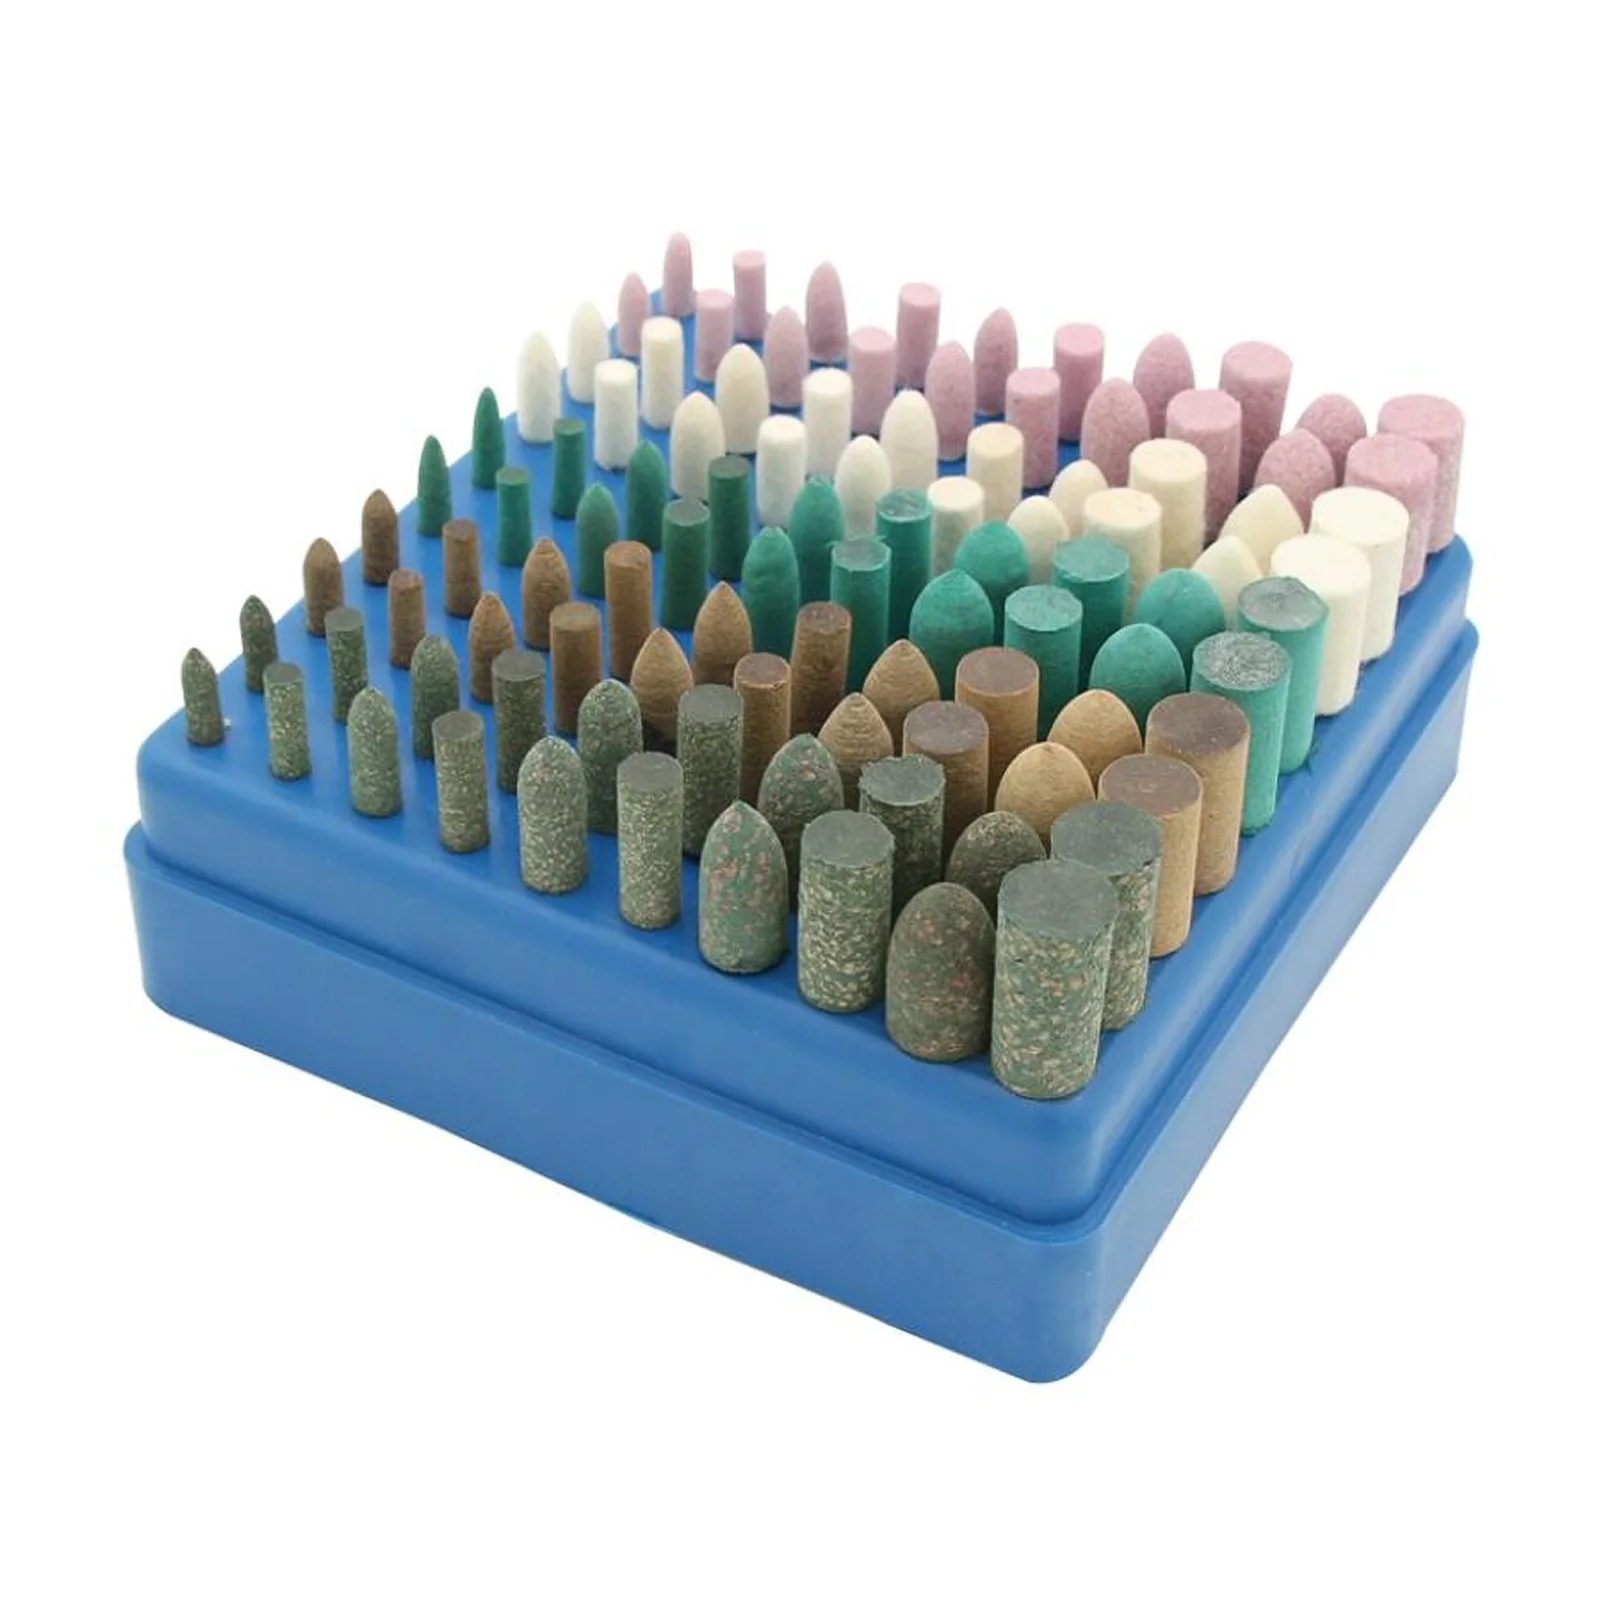 

100pcs Electric Polishing Buffing Accessories Grinding Bits Set 1/8 Shank Wool Sesame Rubber Jade Cowhide Abrasive Rotary Tools